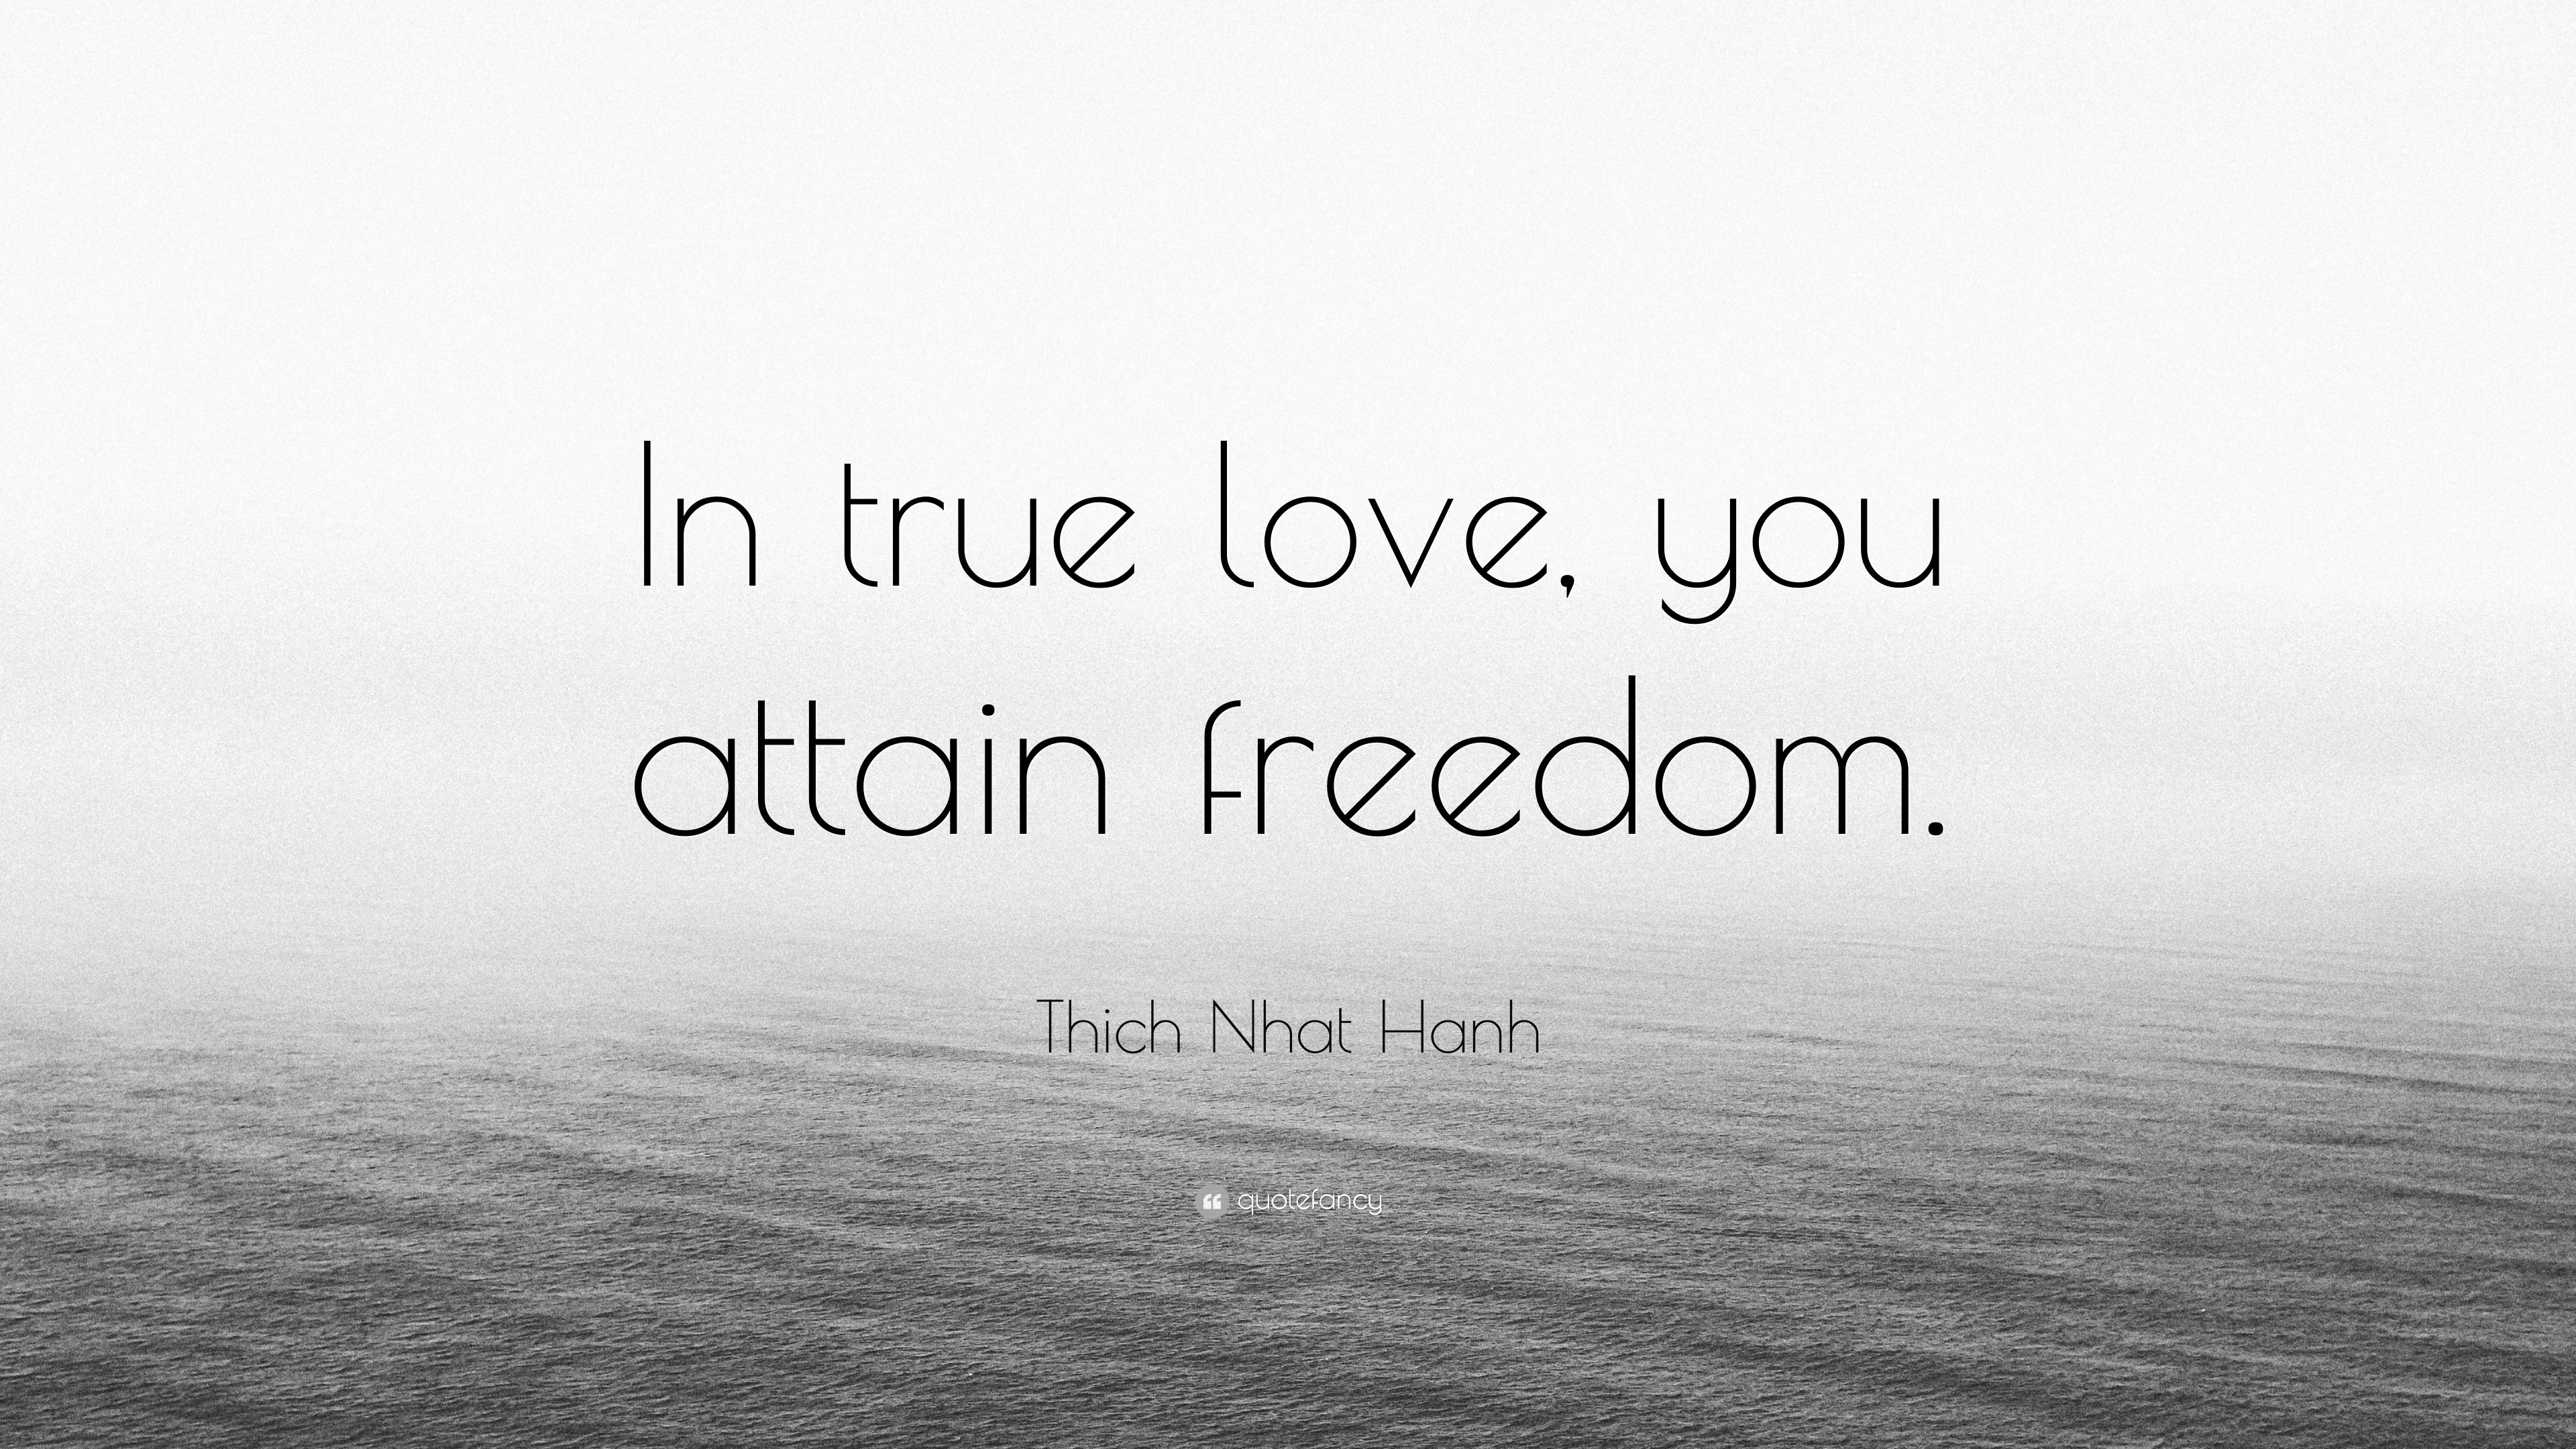 Thich Nhat Hanh Quote “In true love you attain freedom ”